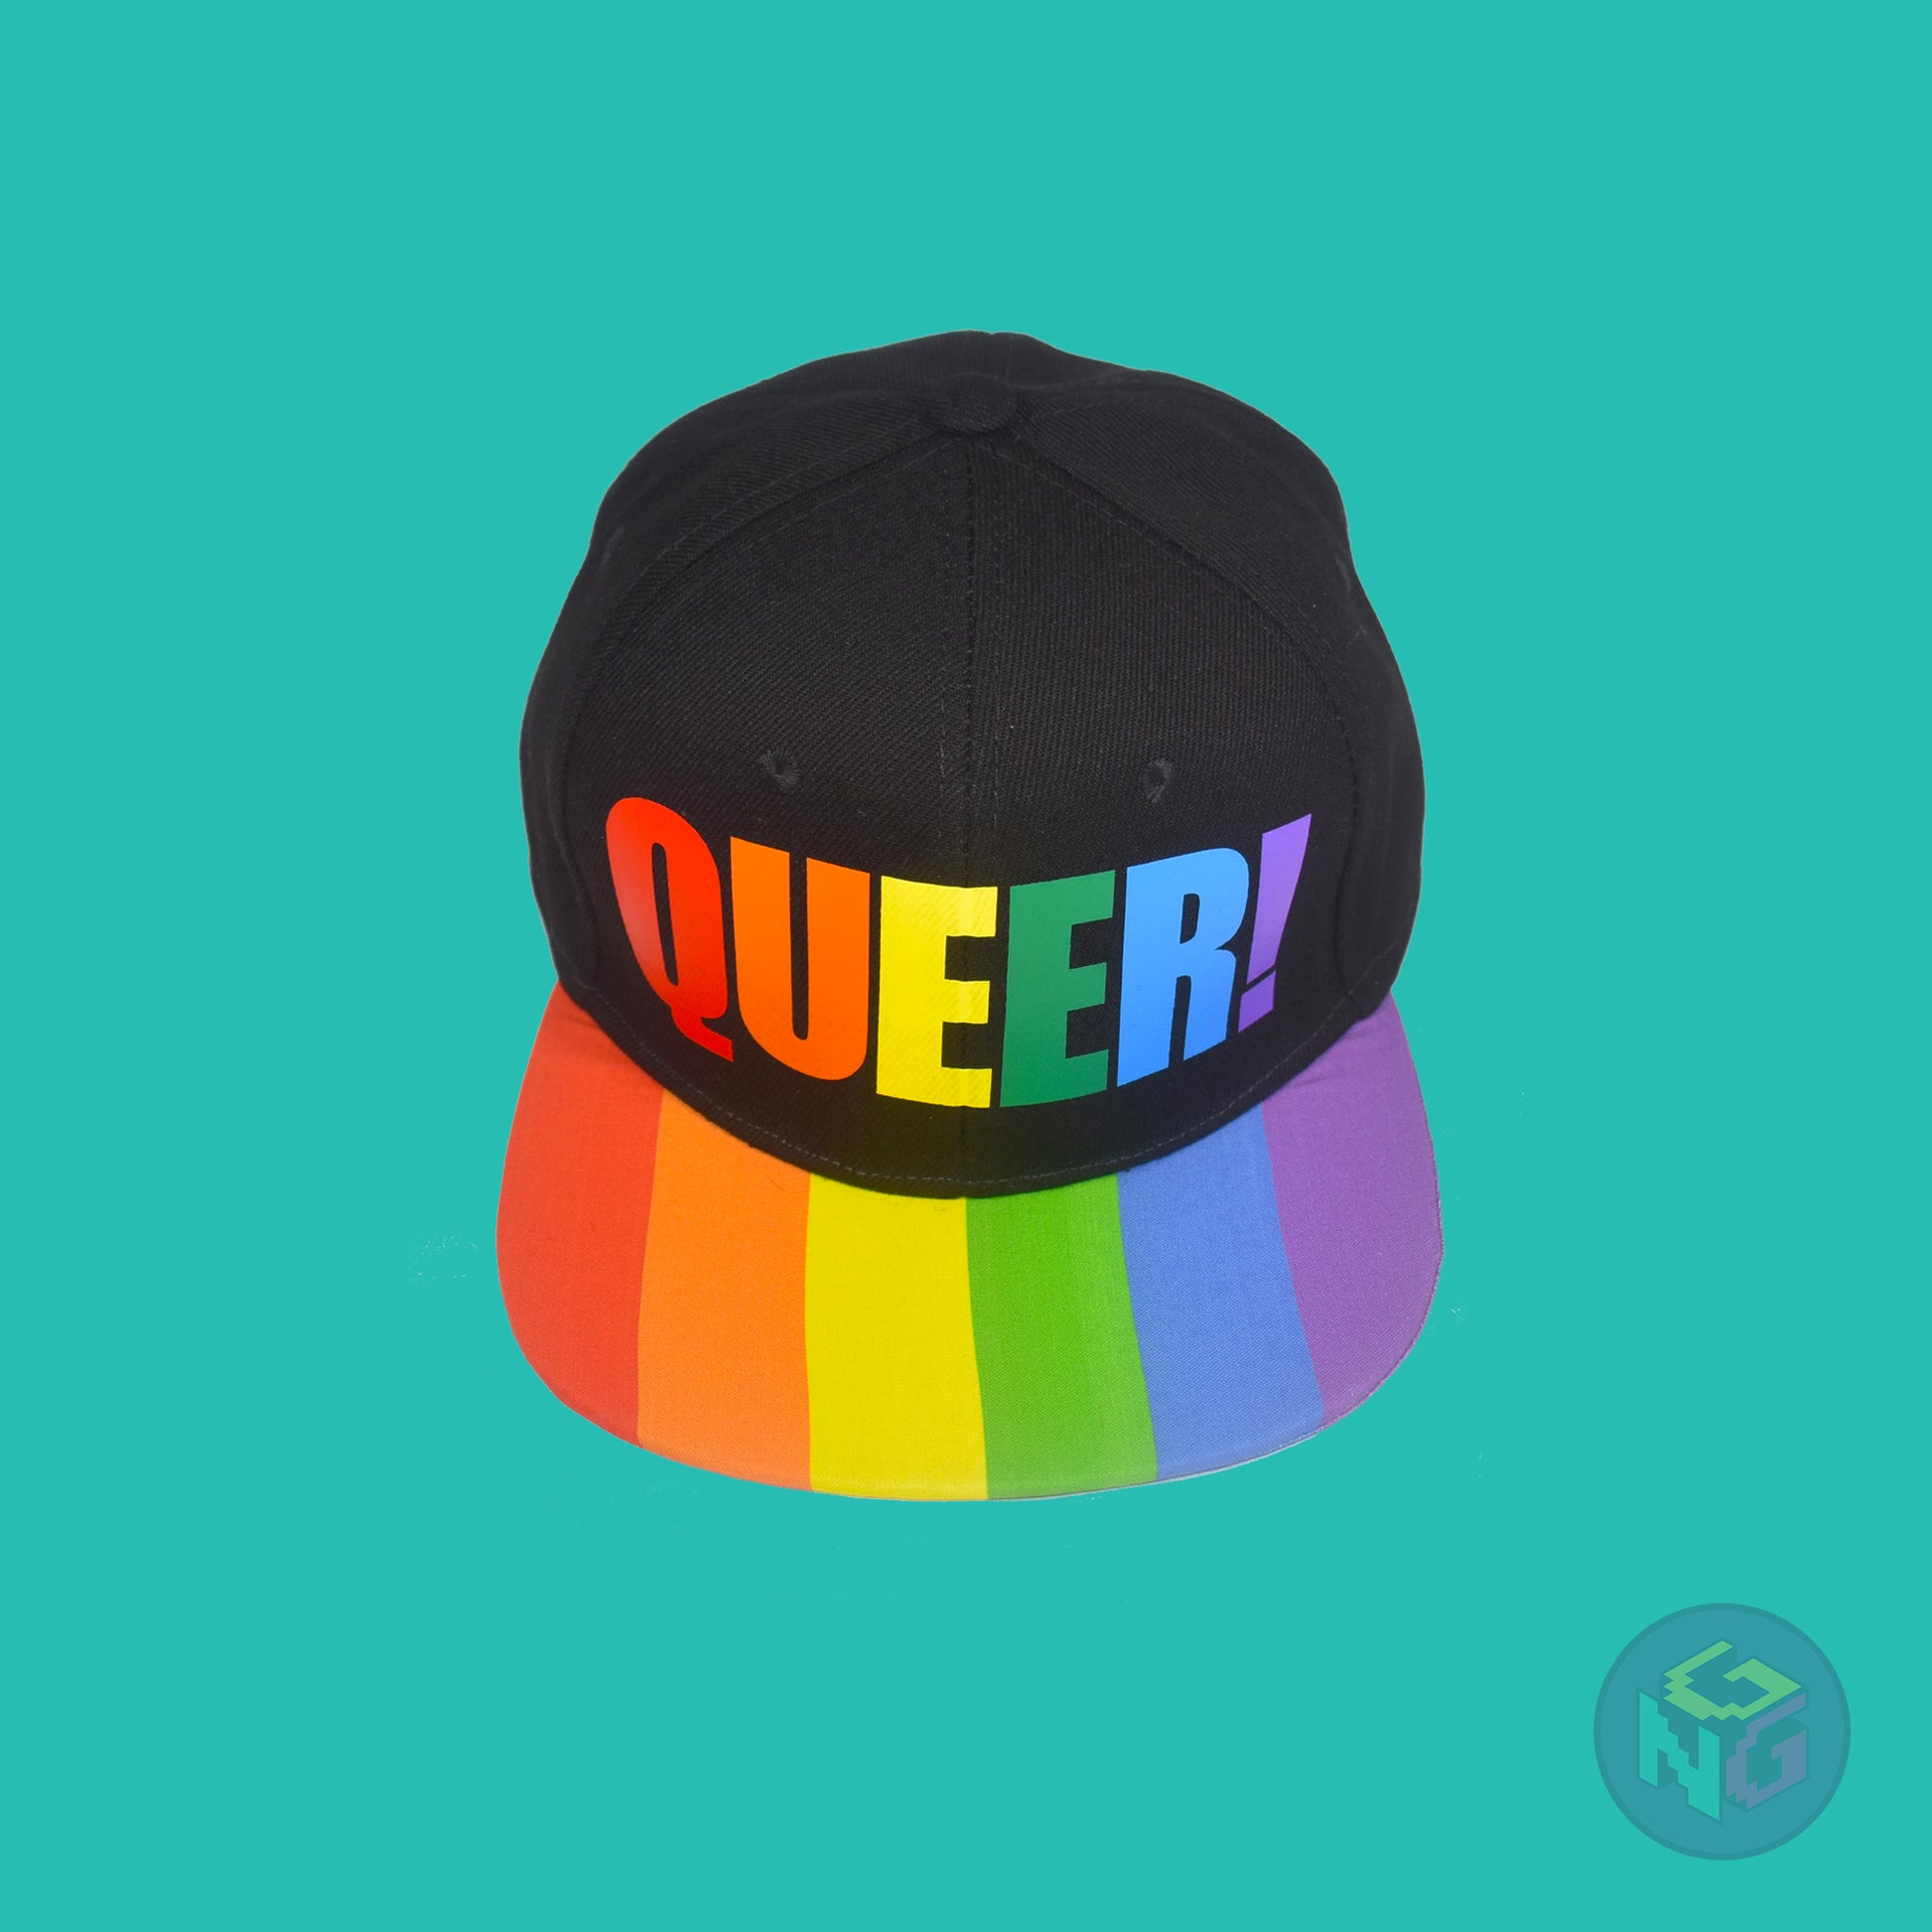 Black flat bill snapback hat. The brim has the rainbow pride flag on both sides and the front of the hat has the word “QUEER!” in rainbow letters. Front top view